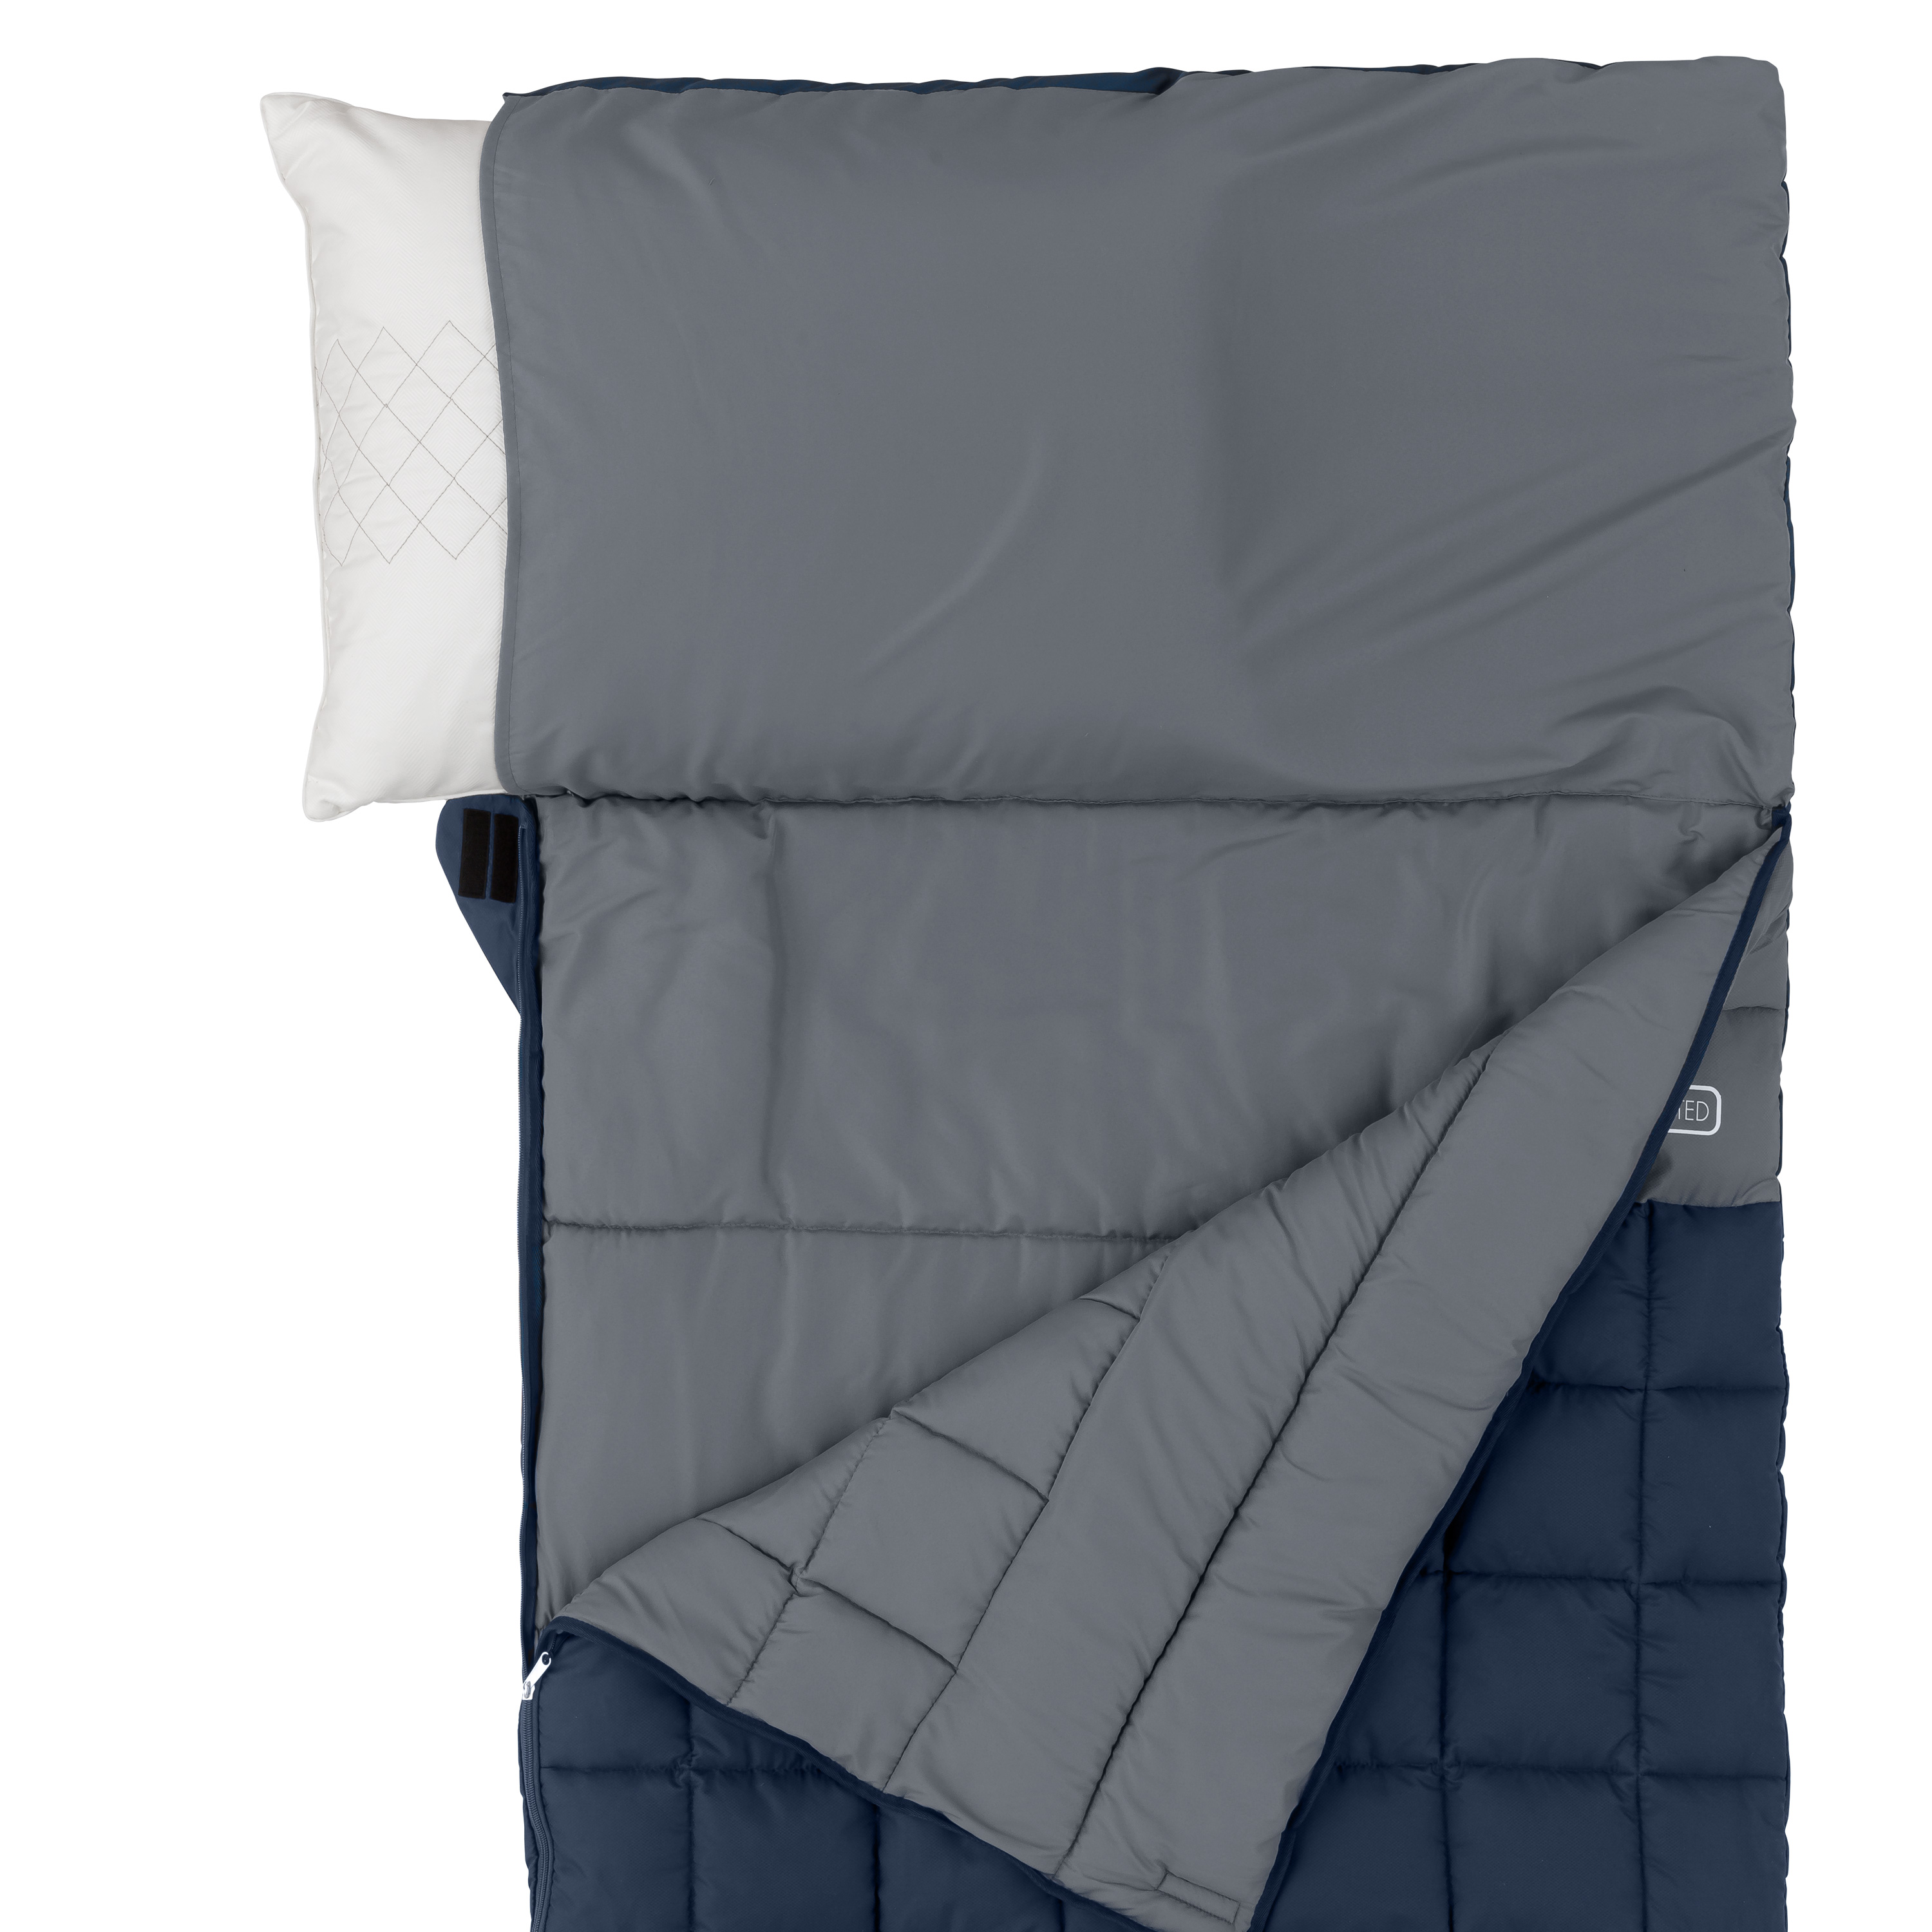 Ozark Trail 40F Weighted Adult Sleeping Bag – Navy & Gray (Size 95 in. x 34 in.) - image 3 of 12